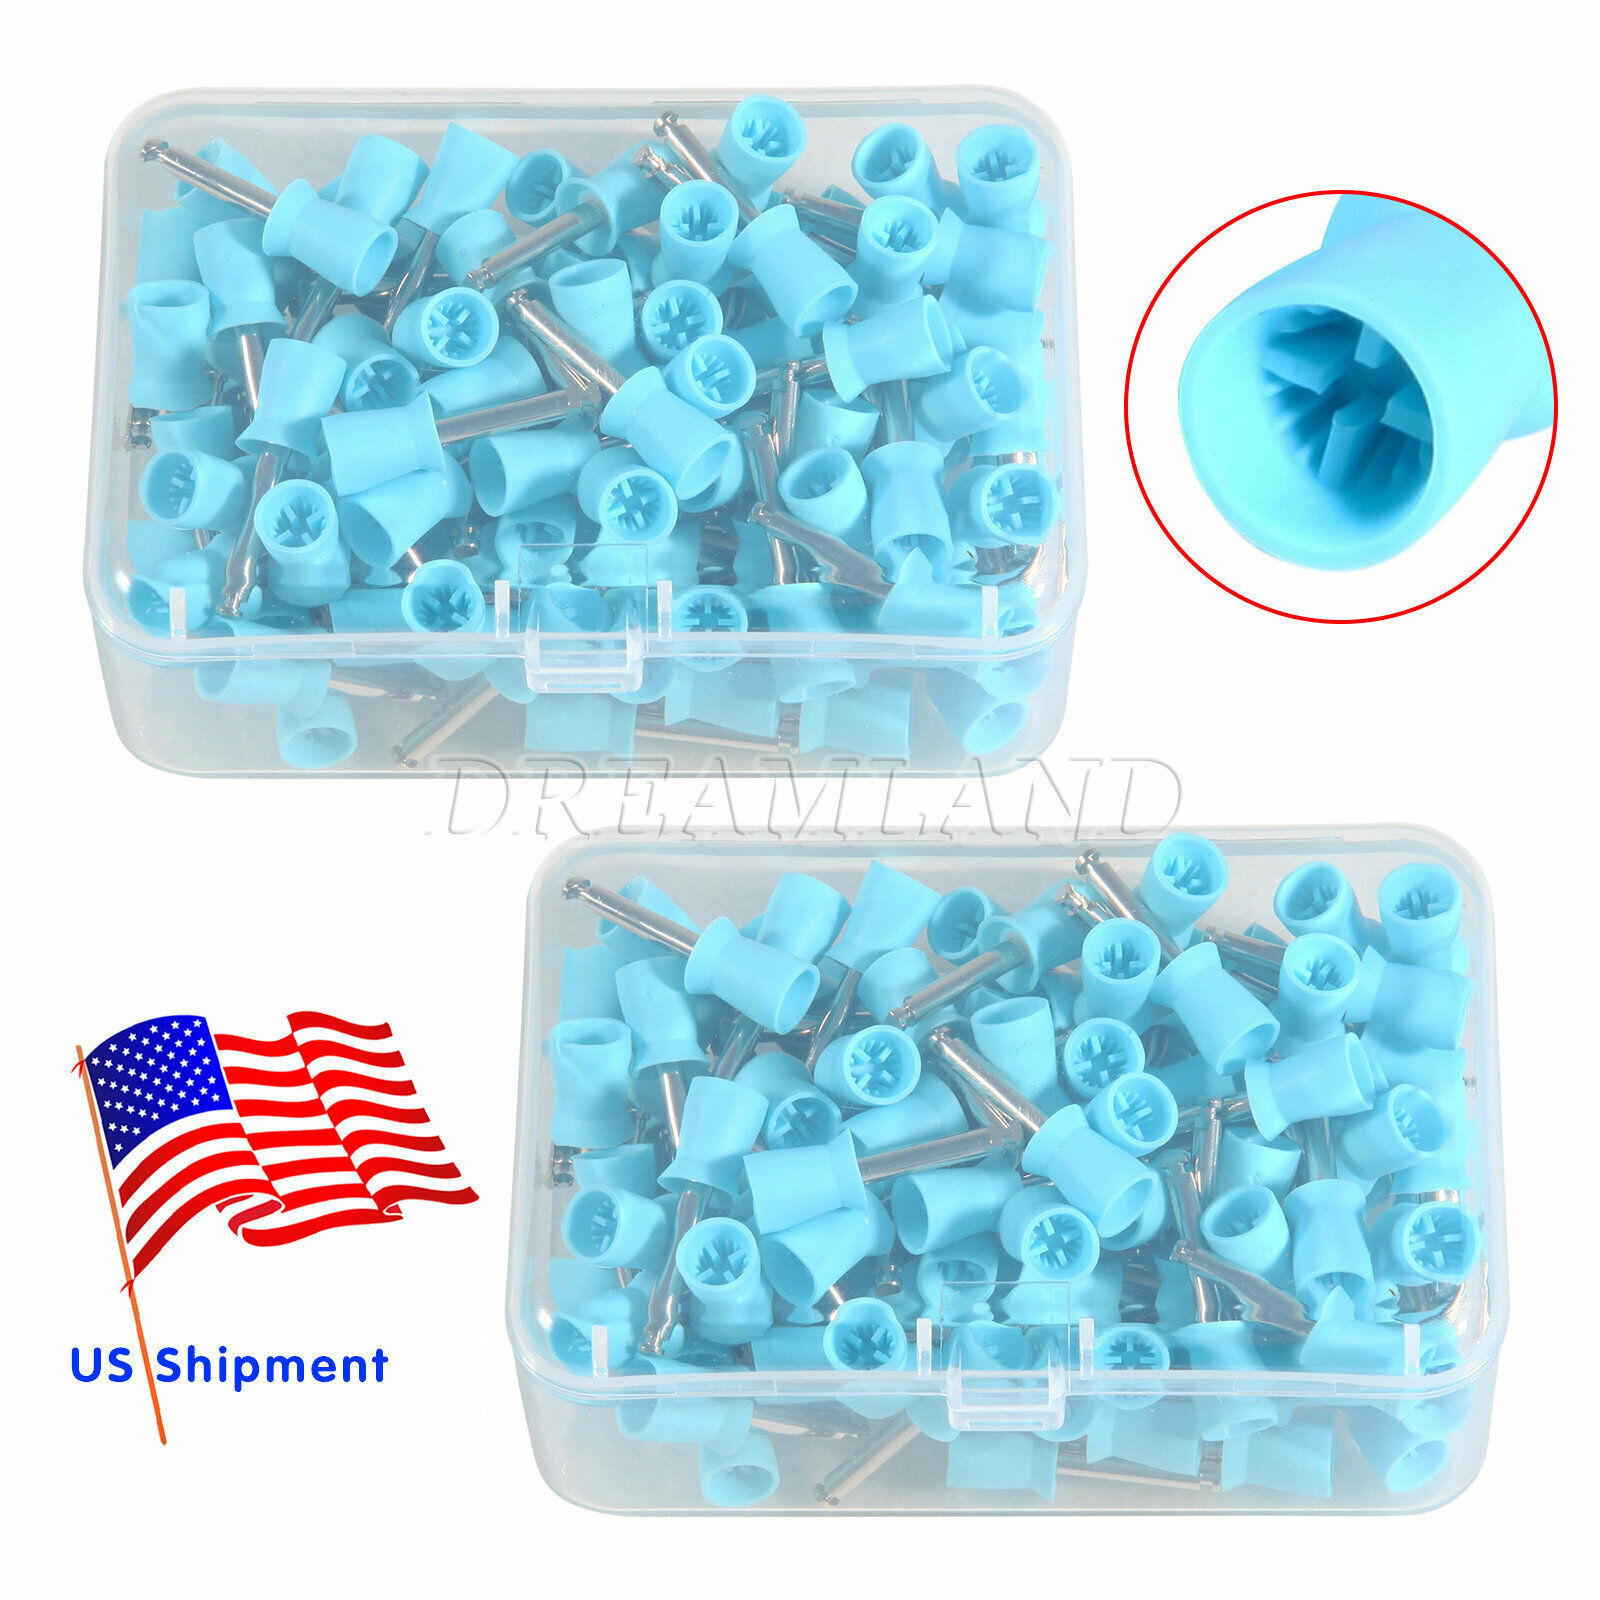 100-200*Dental Rubber Prophy Tooth Polish Polishing Cups Latch T